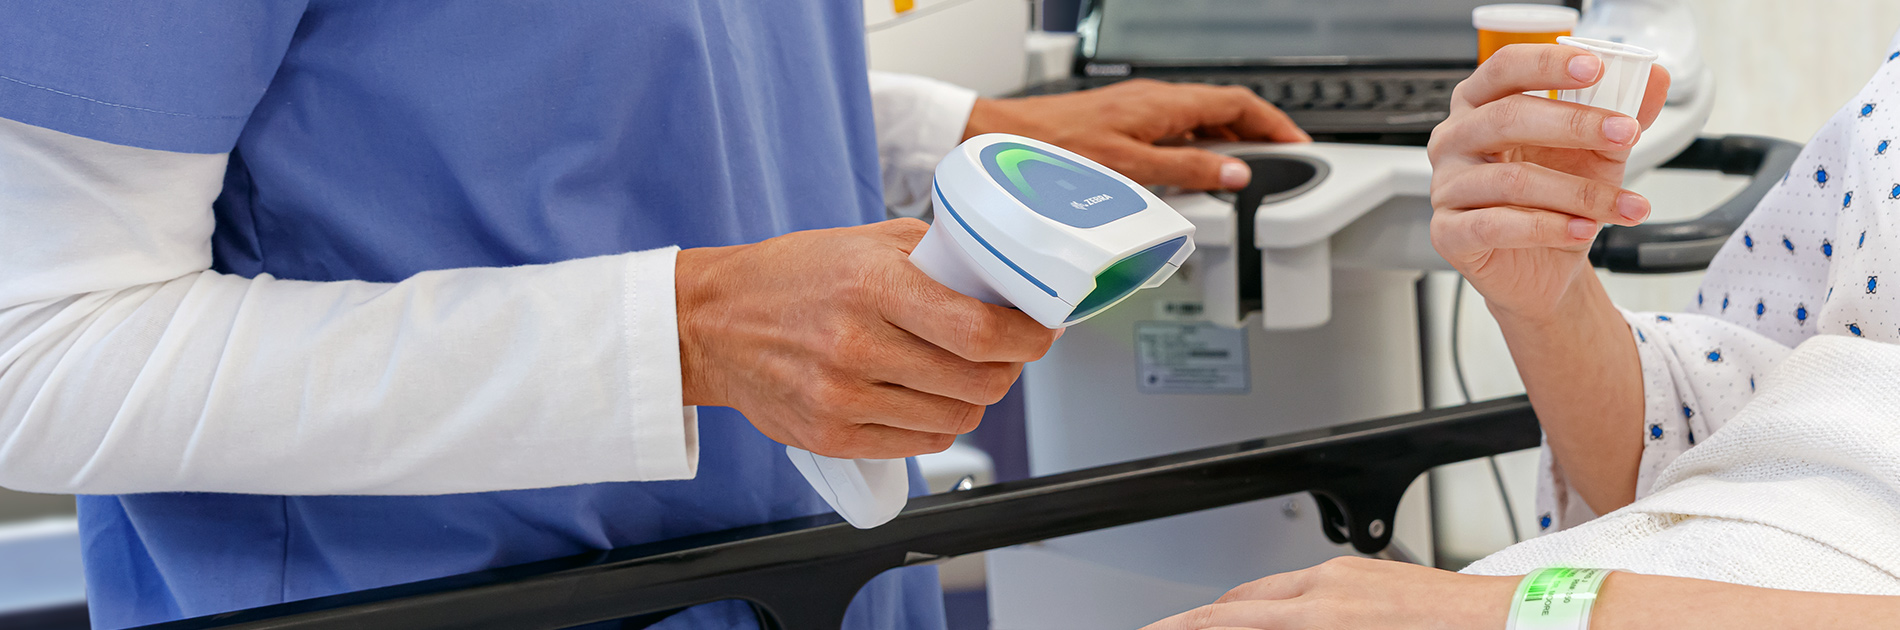 Barcode Scanners For Healthcare